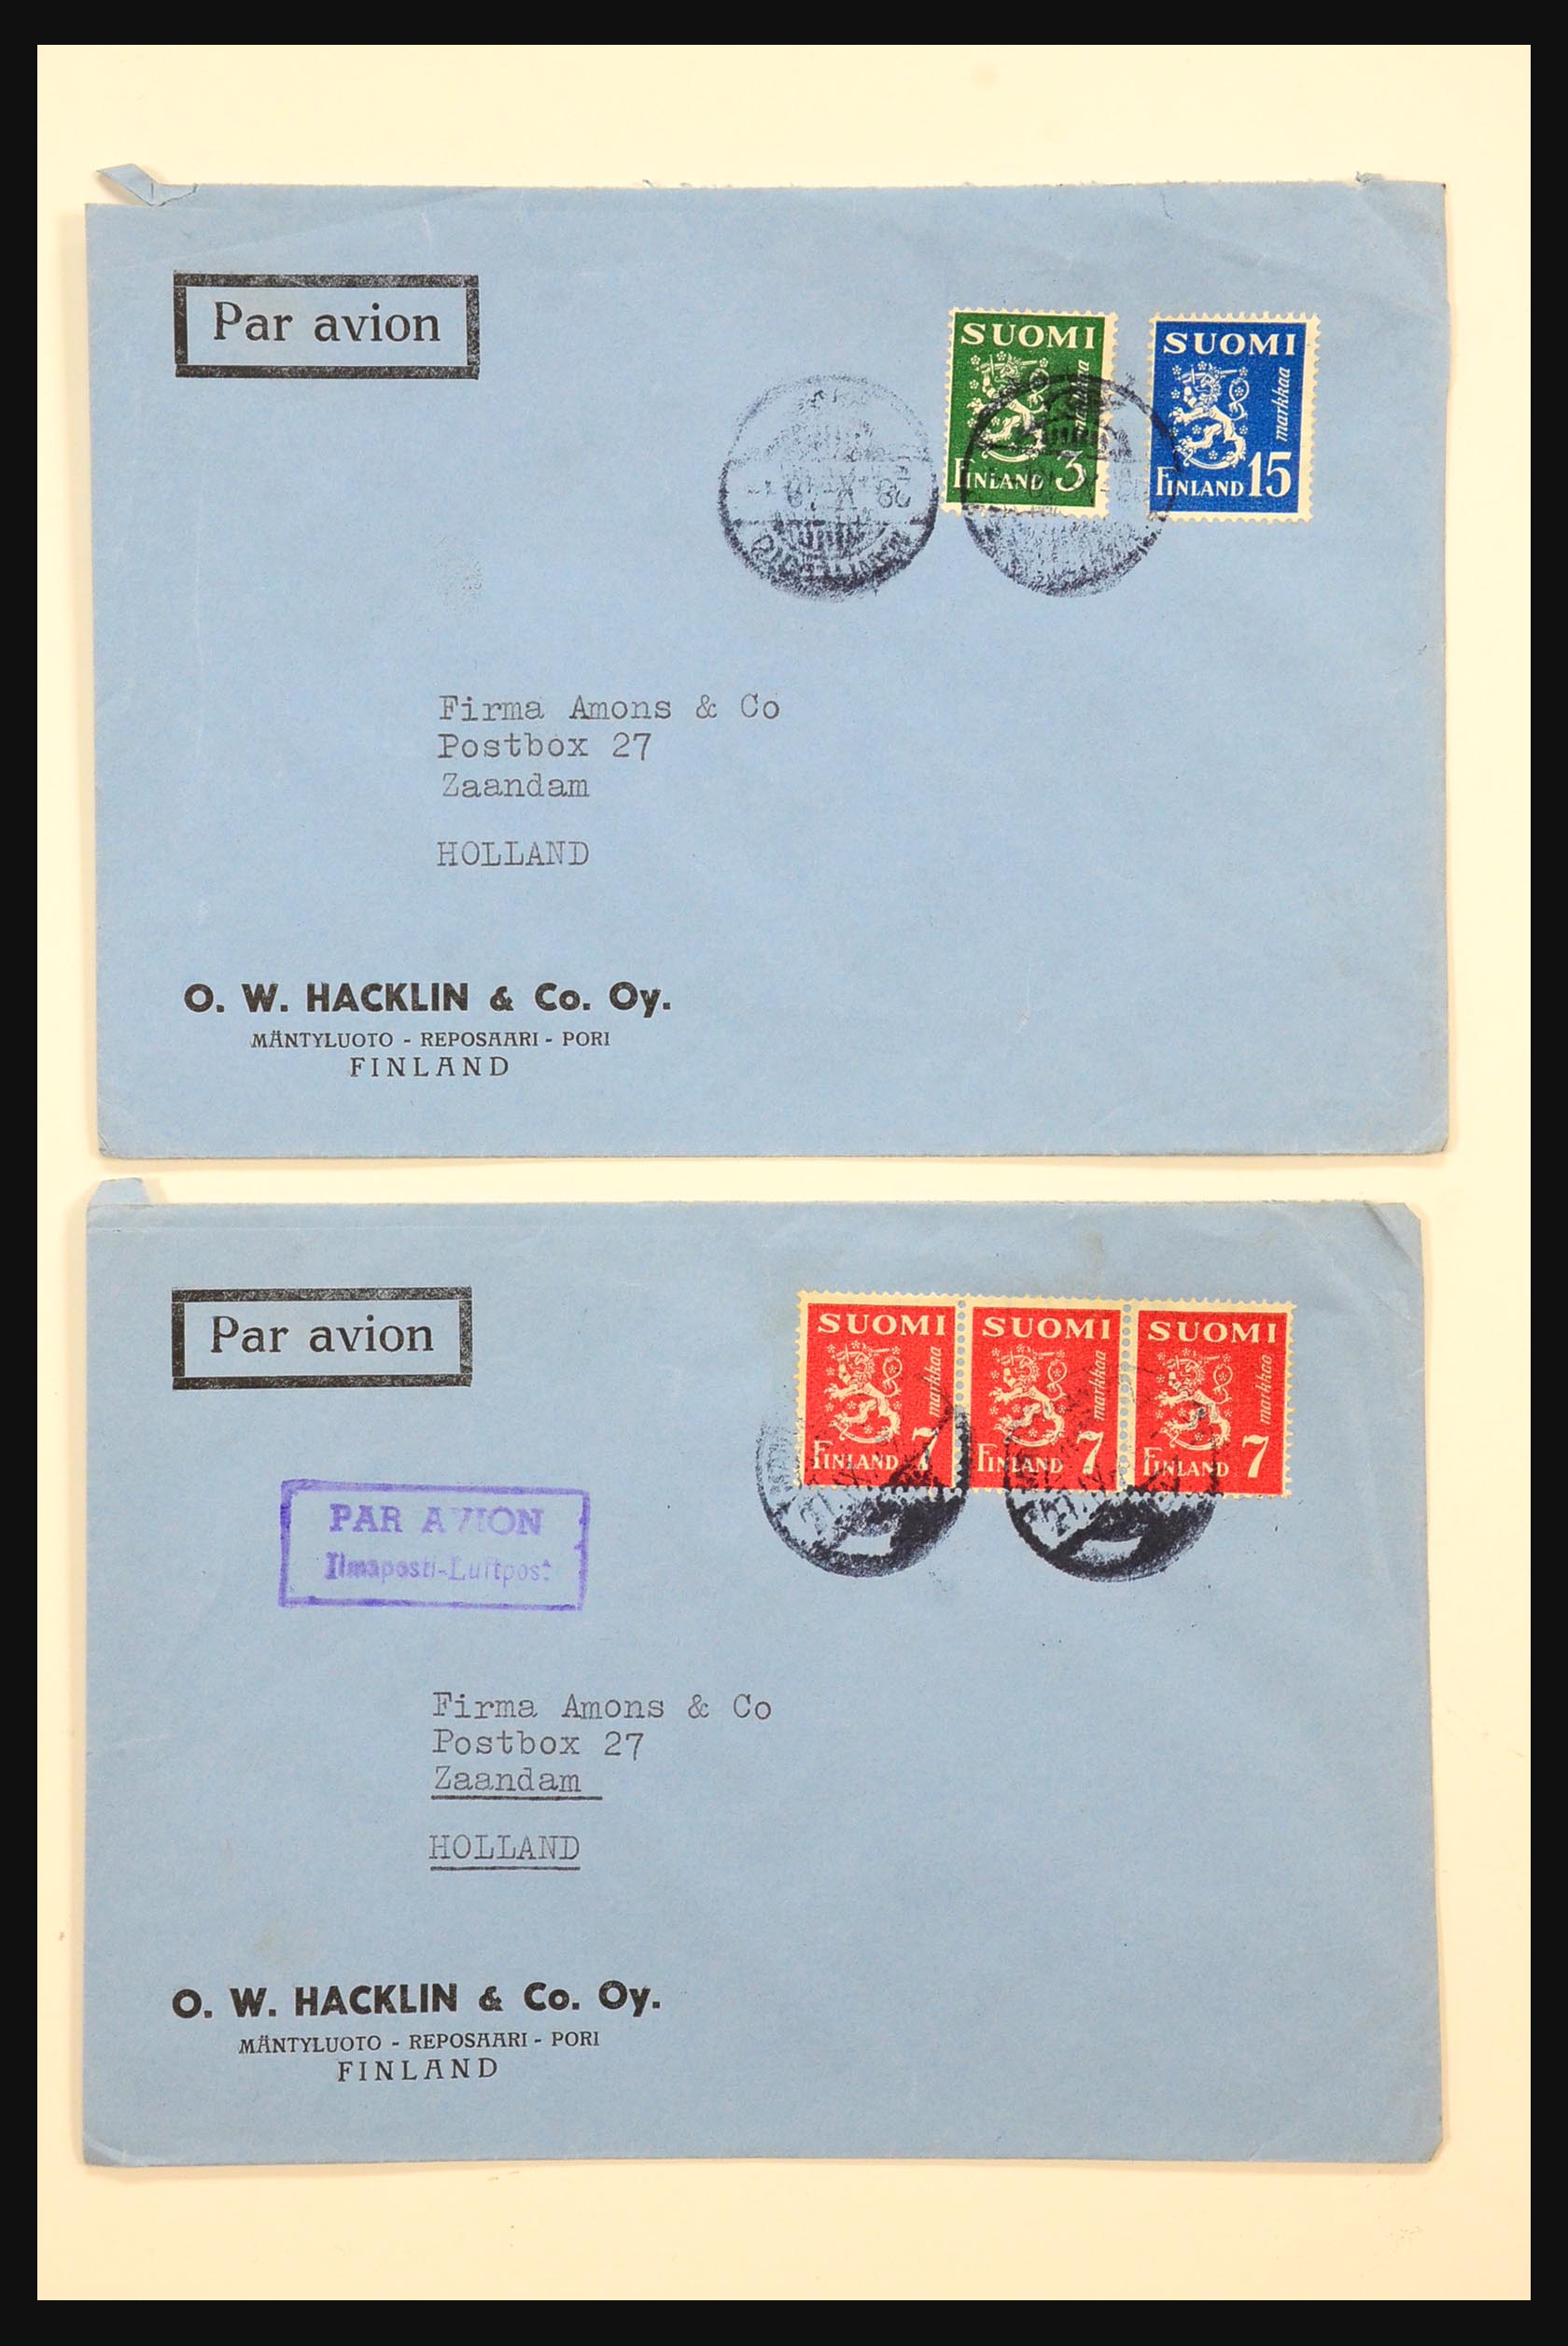 31363 051 - 31363 Finland covers 1874-1974.